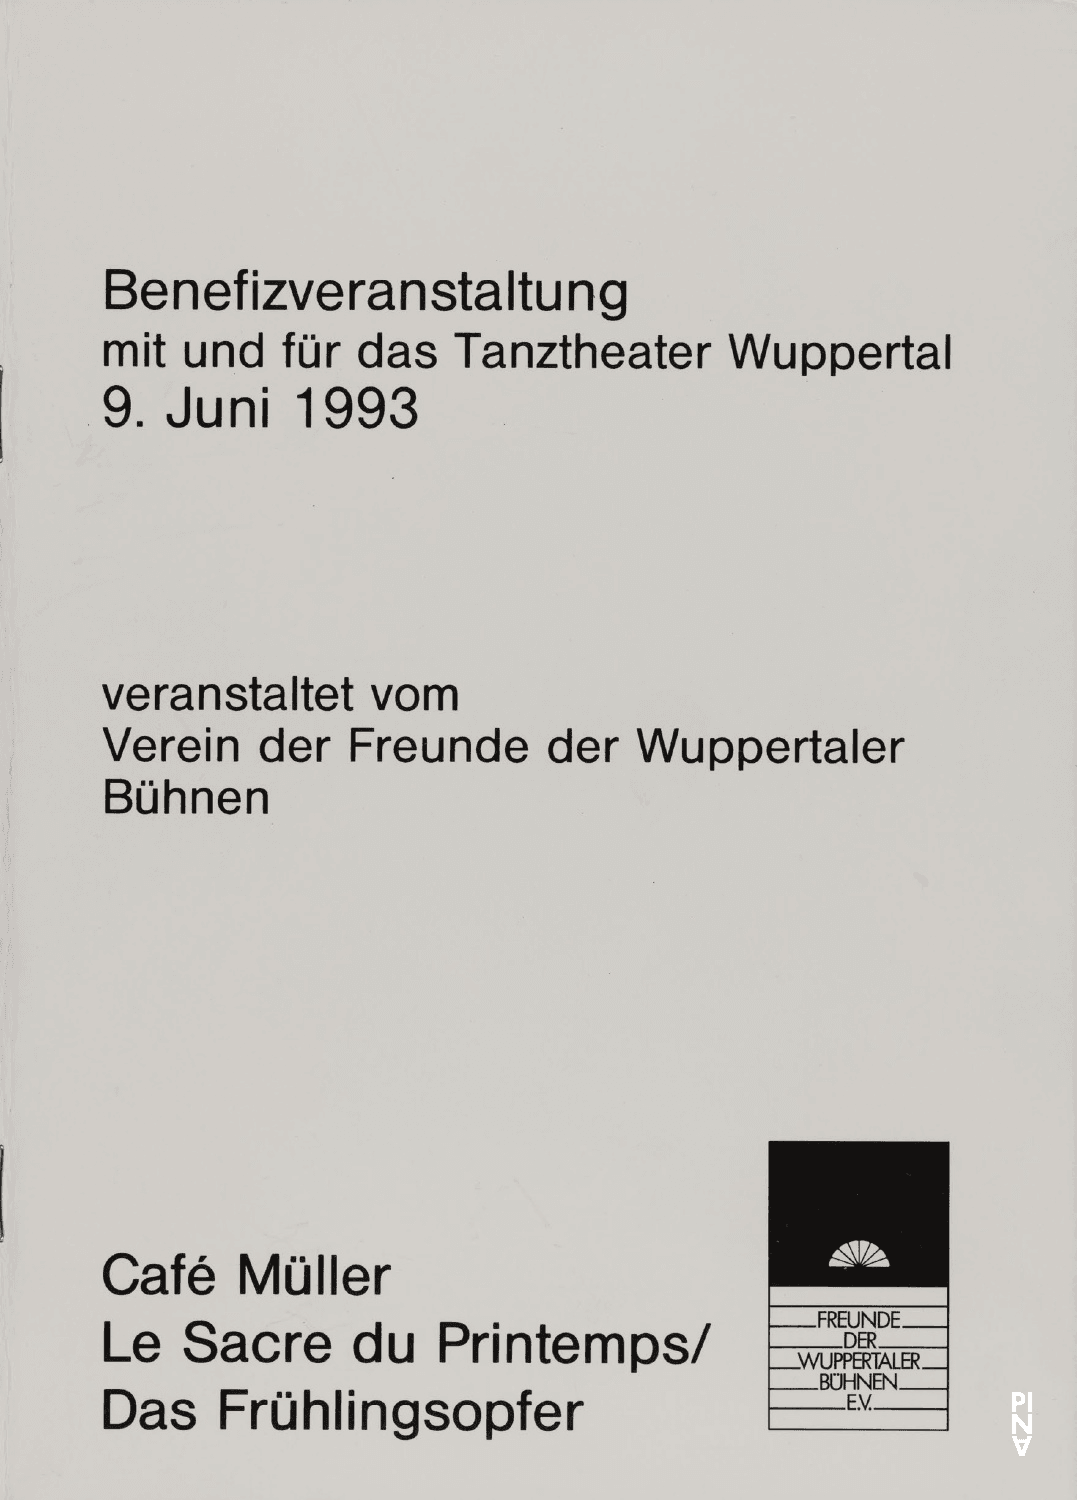 Booklet for “The Rite of Spring” and “Café Müller” by Pina Bausch with Tanztheater Wuppertal in in Wuppertal, June 9, 1993